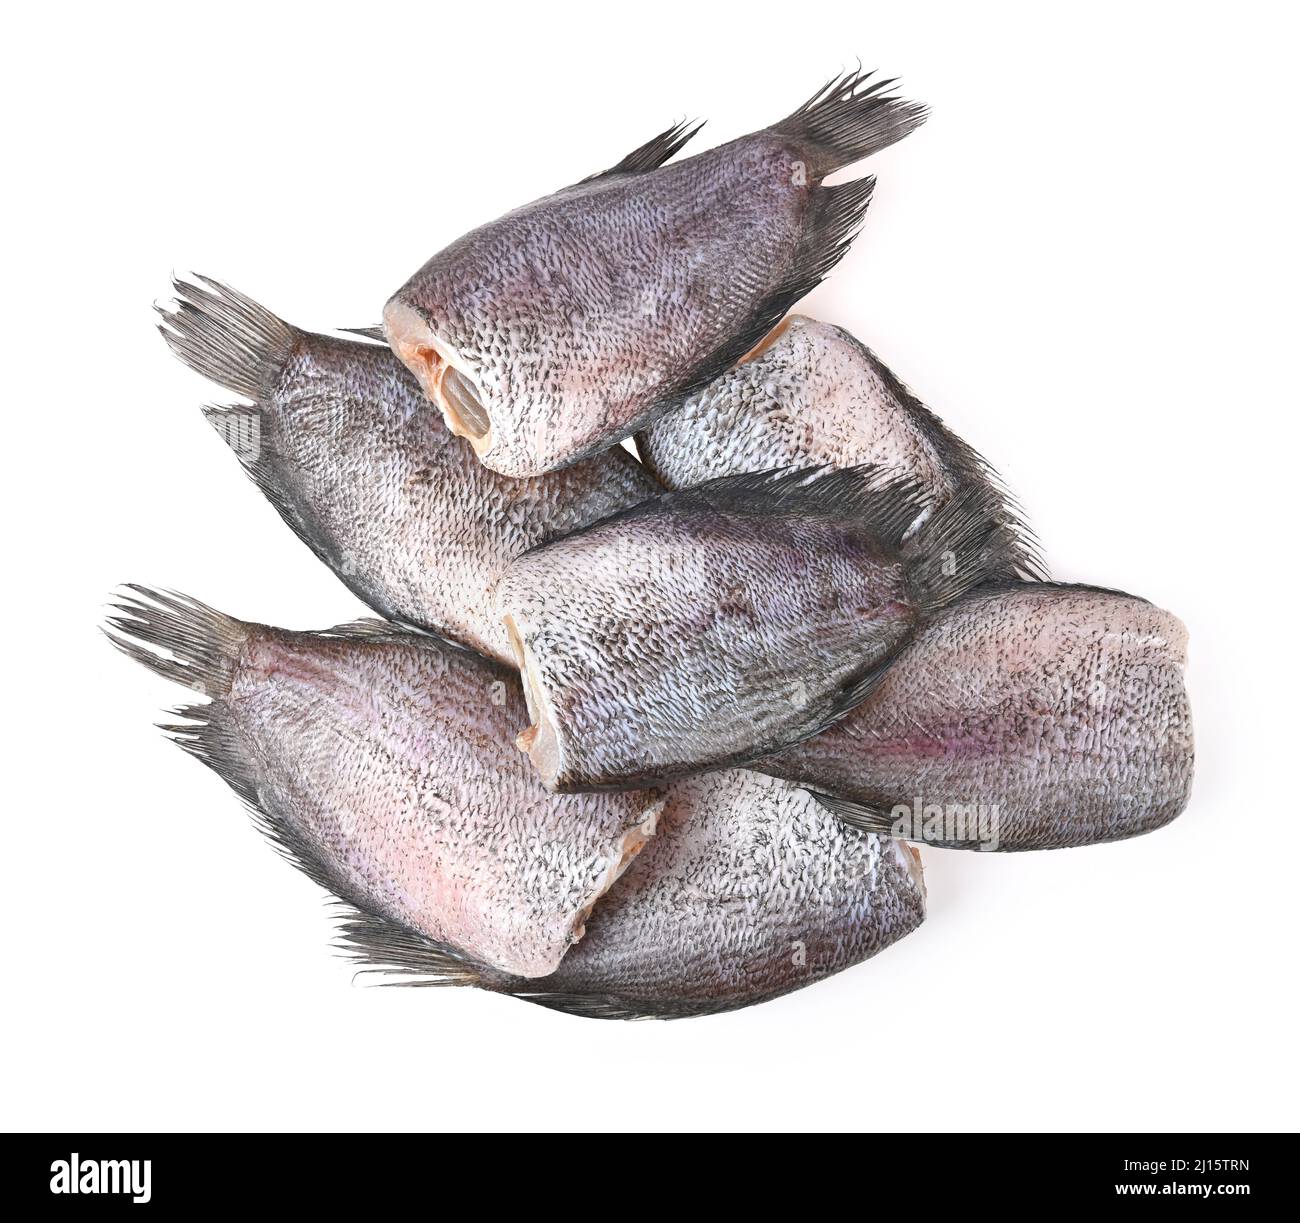 Sun dried fish, SnakeSkin Gourami Fish, Pla Salit (Trichogaster pectoralis) isolated on white background. Top view Stock Photo